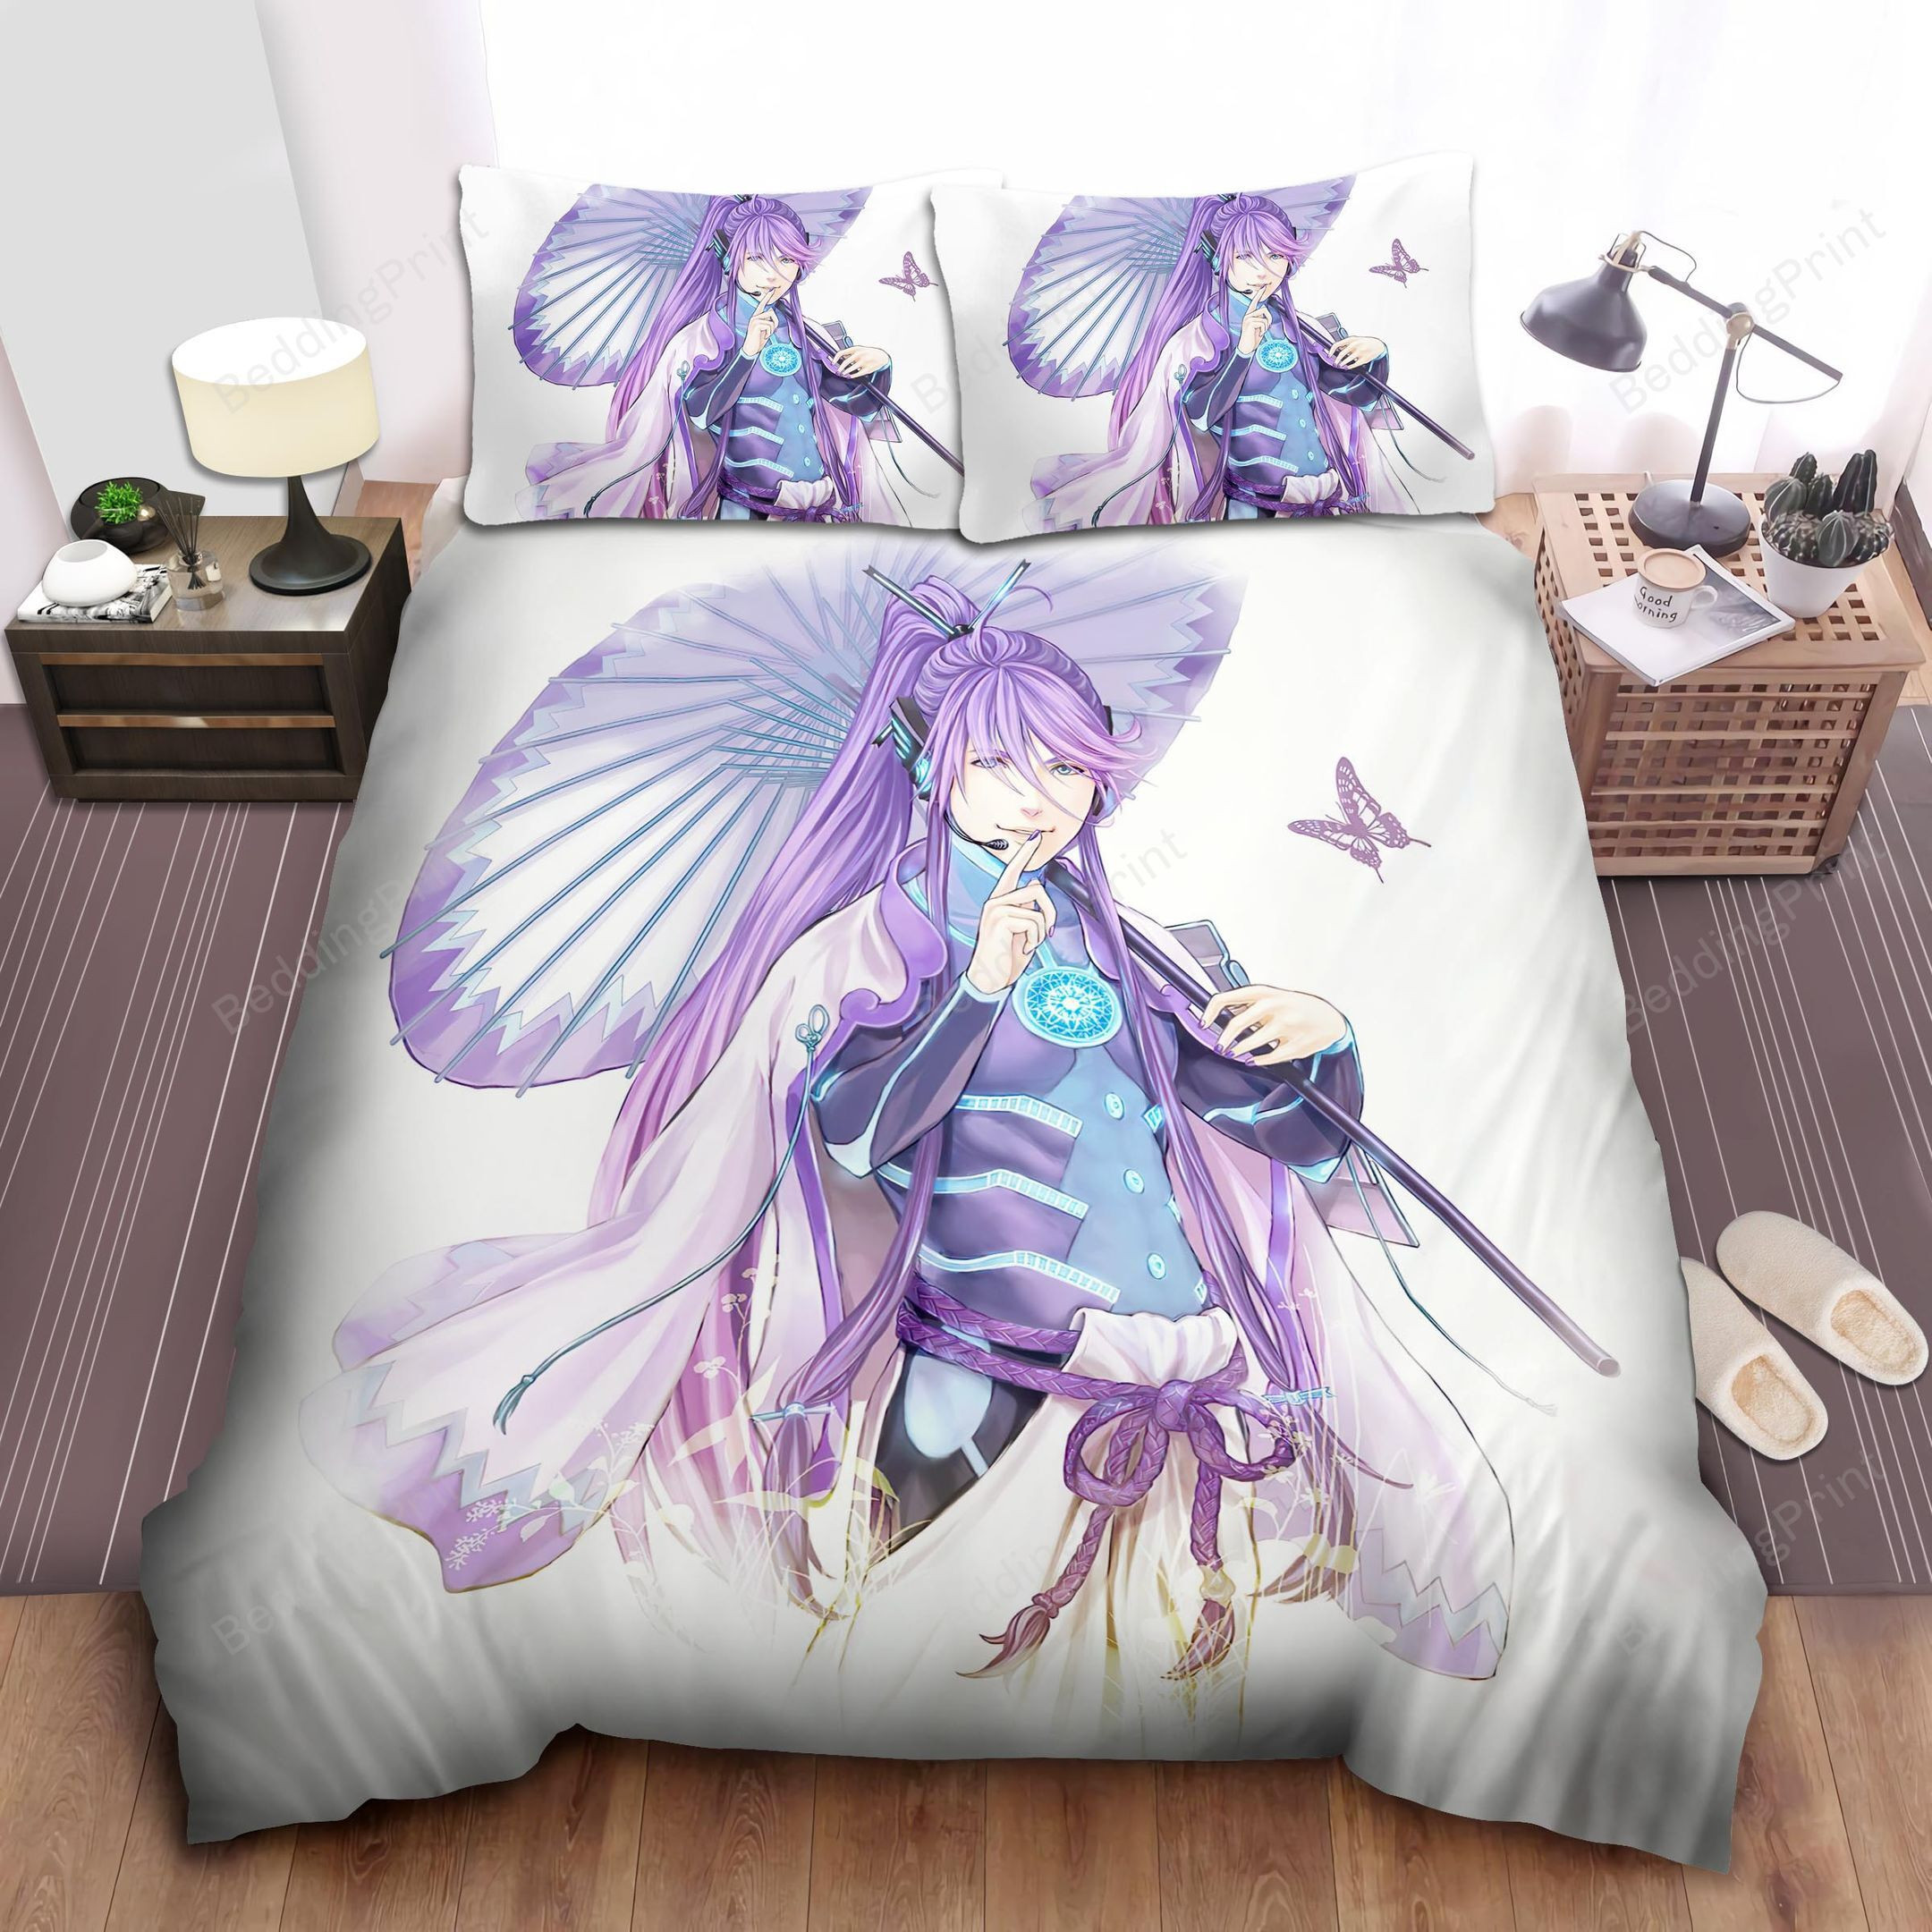 (Gackpoid) Kamui Gakupo With Purple Butterflies Bed Sheets Duvet Cover Bedding Sets. PLEASE NOTE: This is a duvet cover, NOT a Comforter